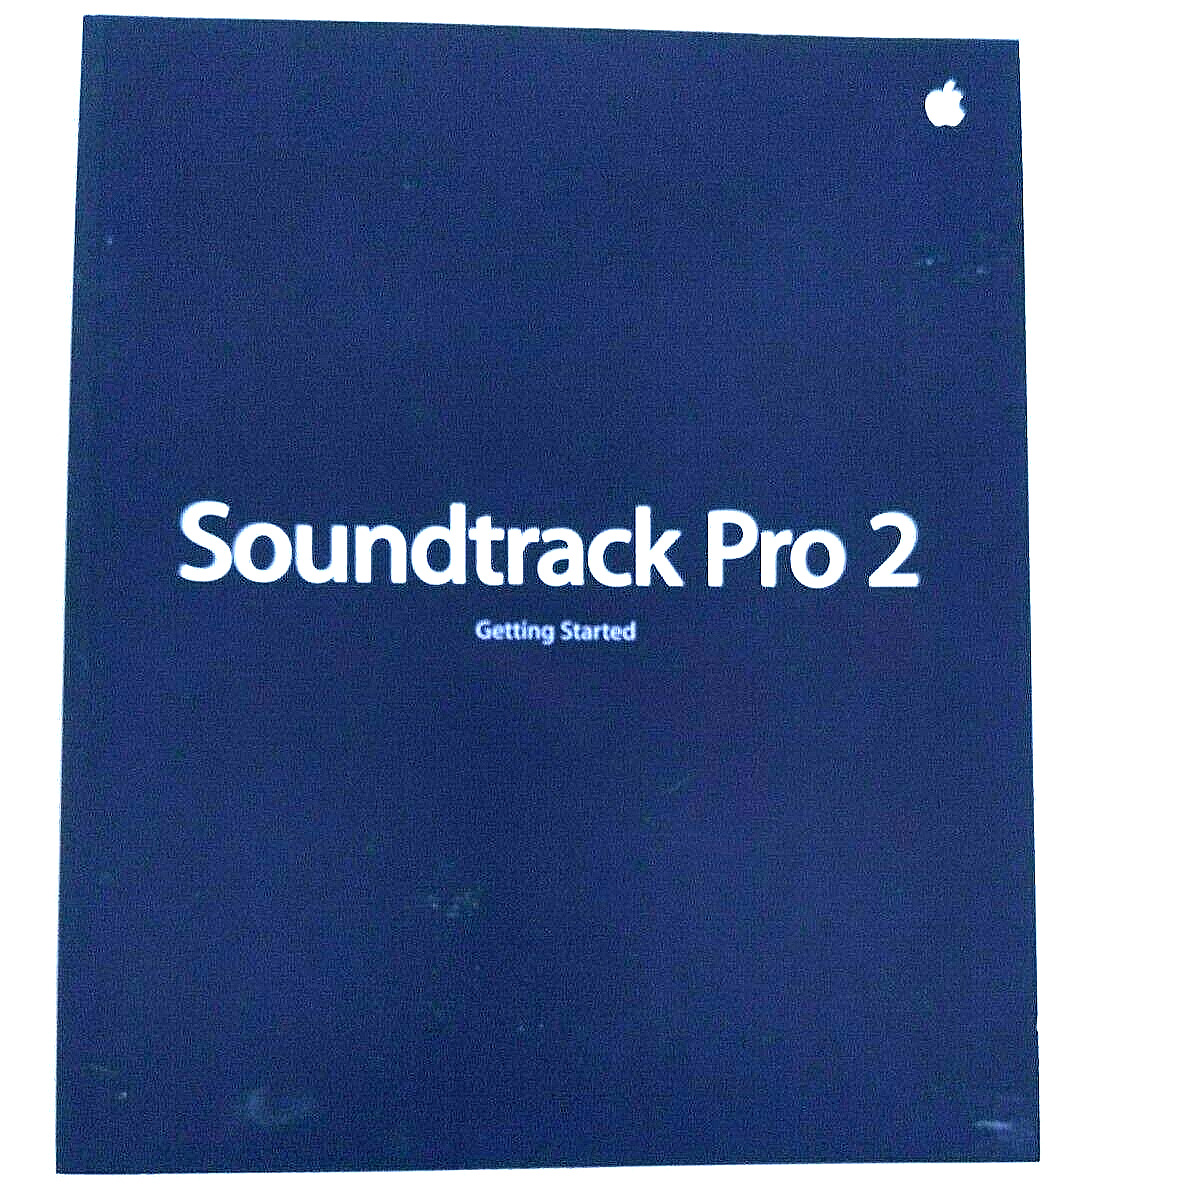 2007 Apple Logic Soundtrack Pro 2 Getting Started Guide for Audio Software